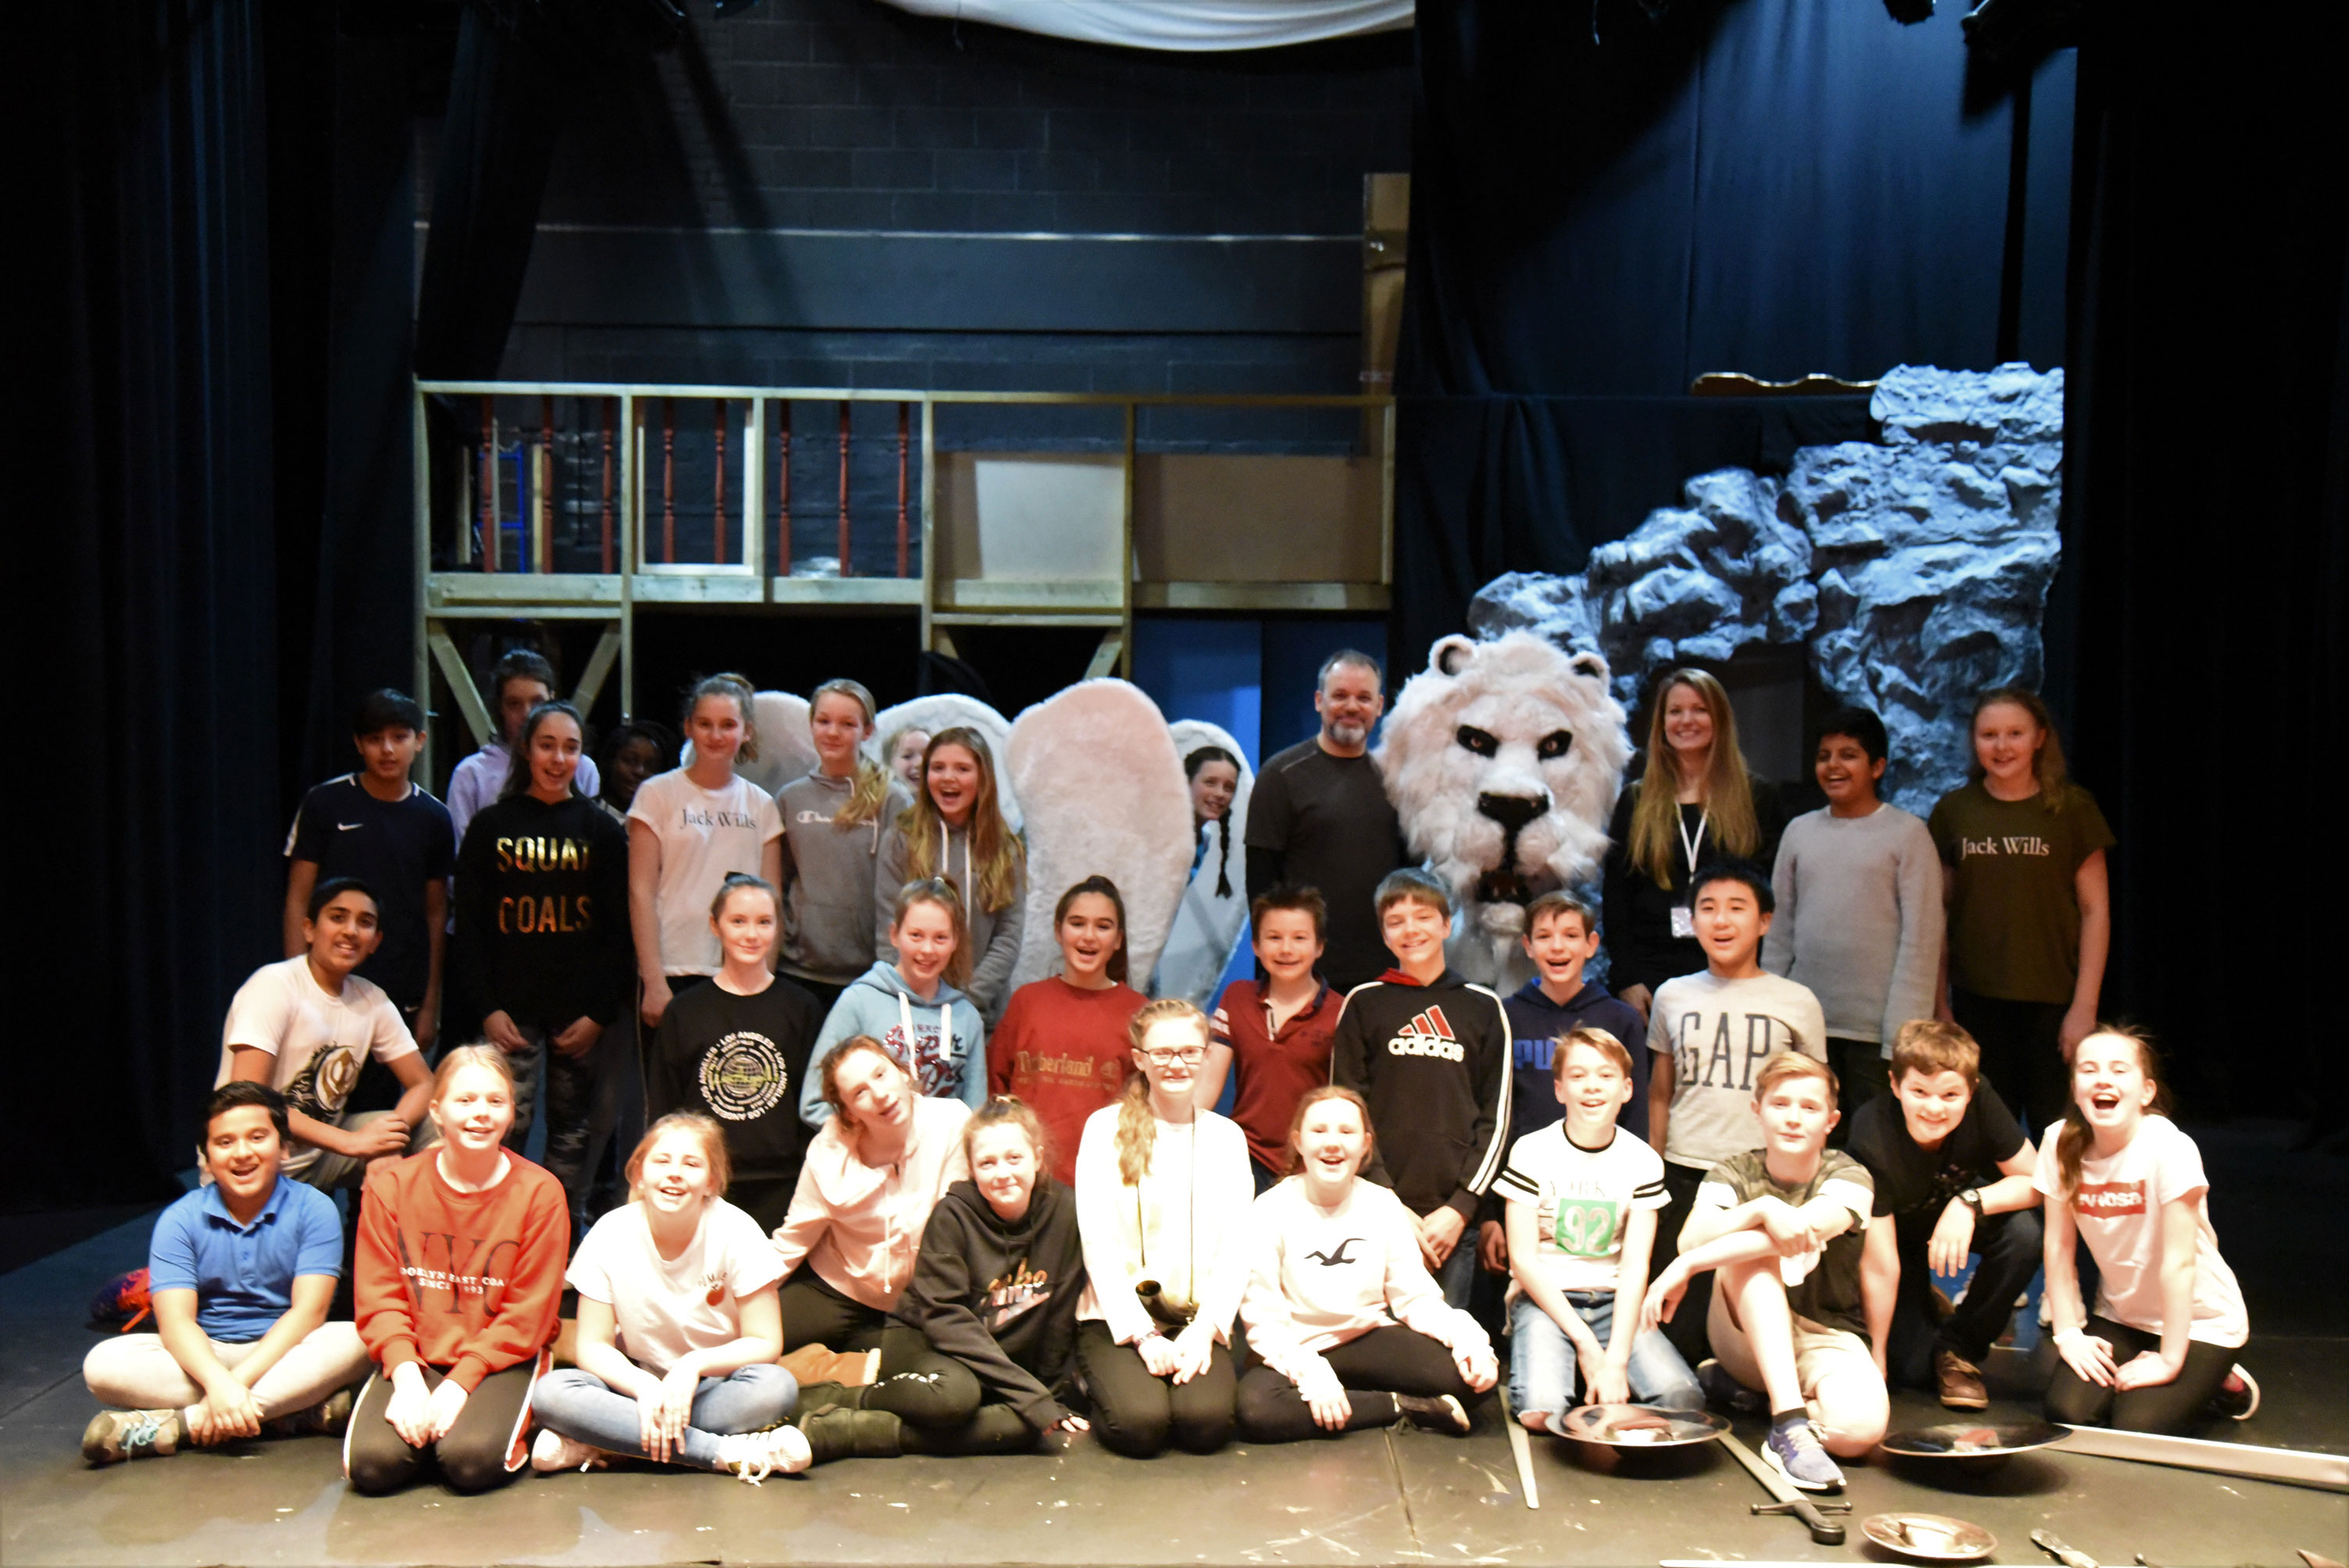 Years 7 and 8 Production of The Lion, The Witch and The Wardrobe - February 2019